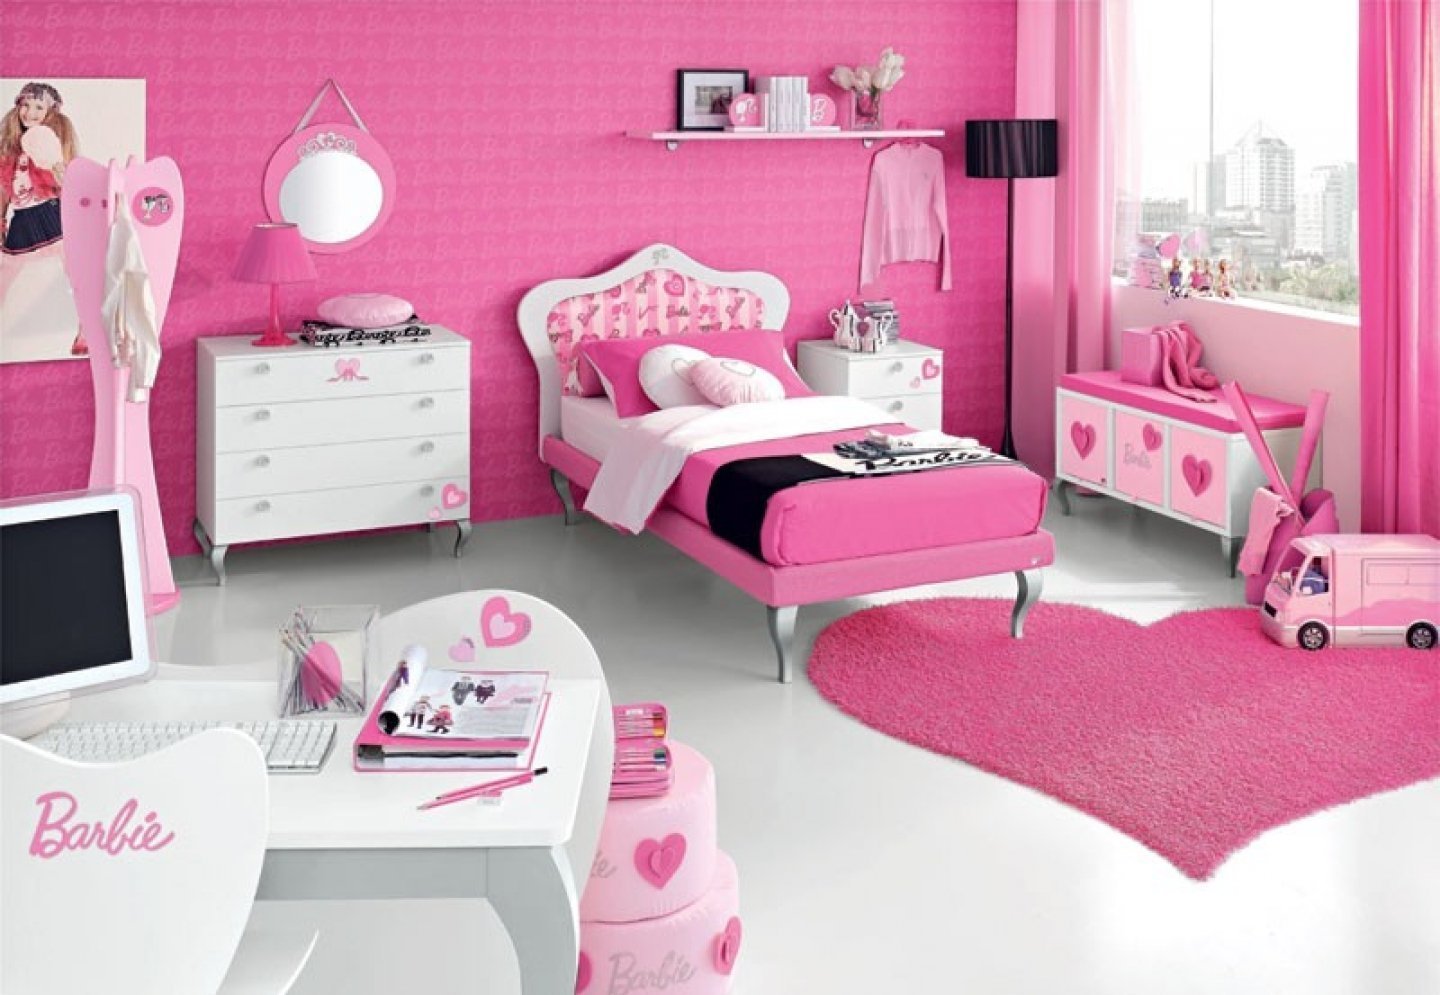 Pin by Pinkdollkitty on Barbie real life | Barbie room decor, Barbie room, Barbie  bedroom